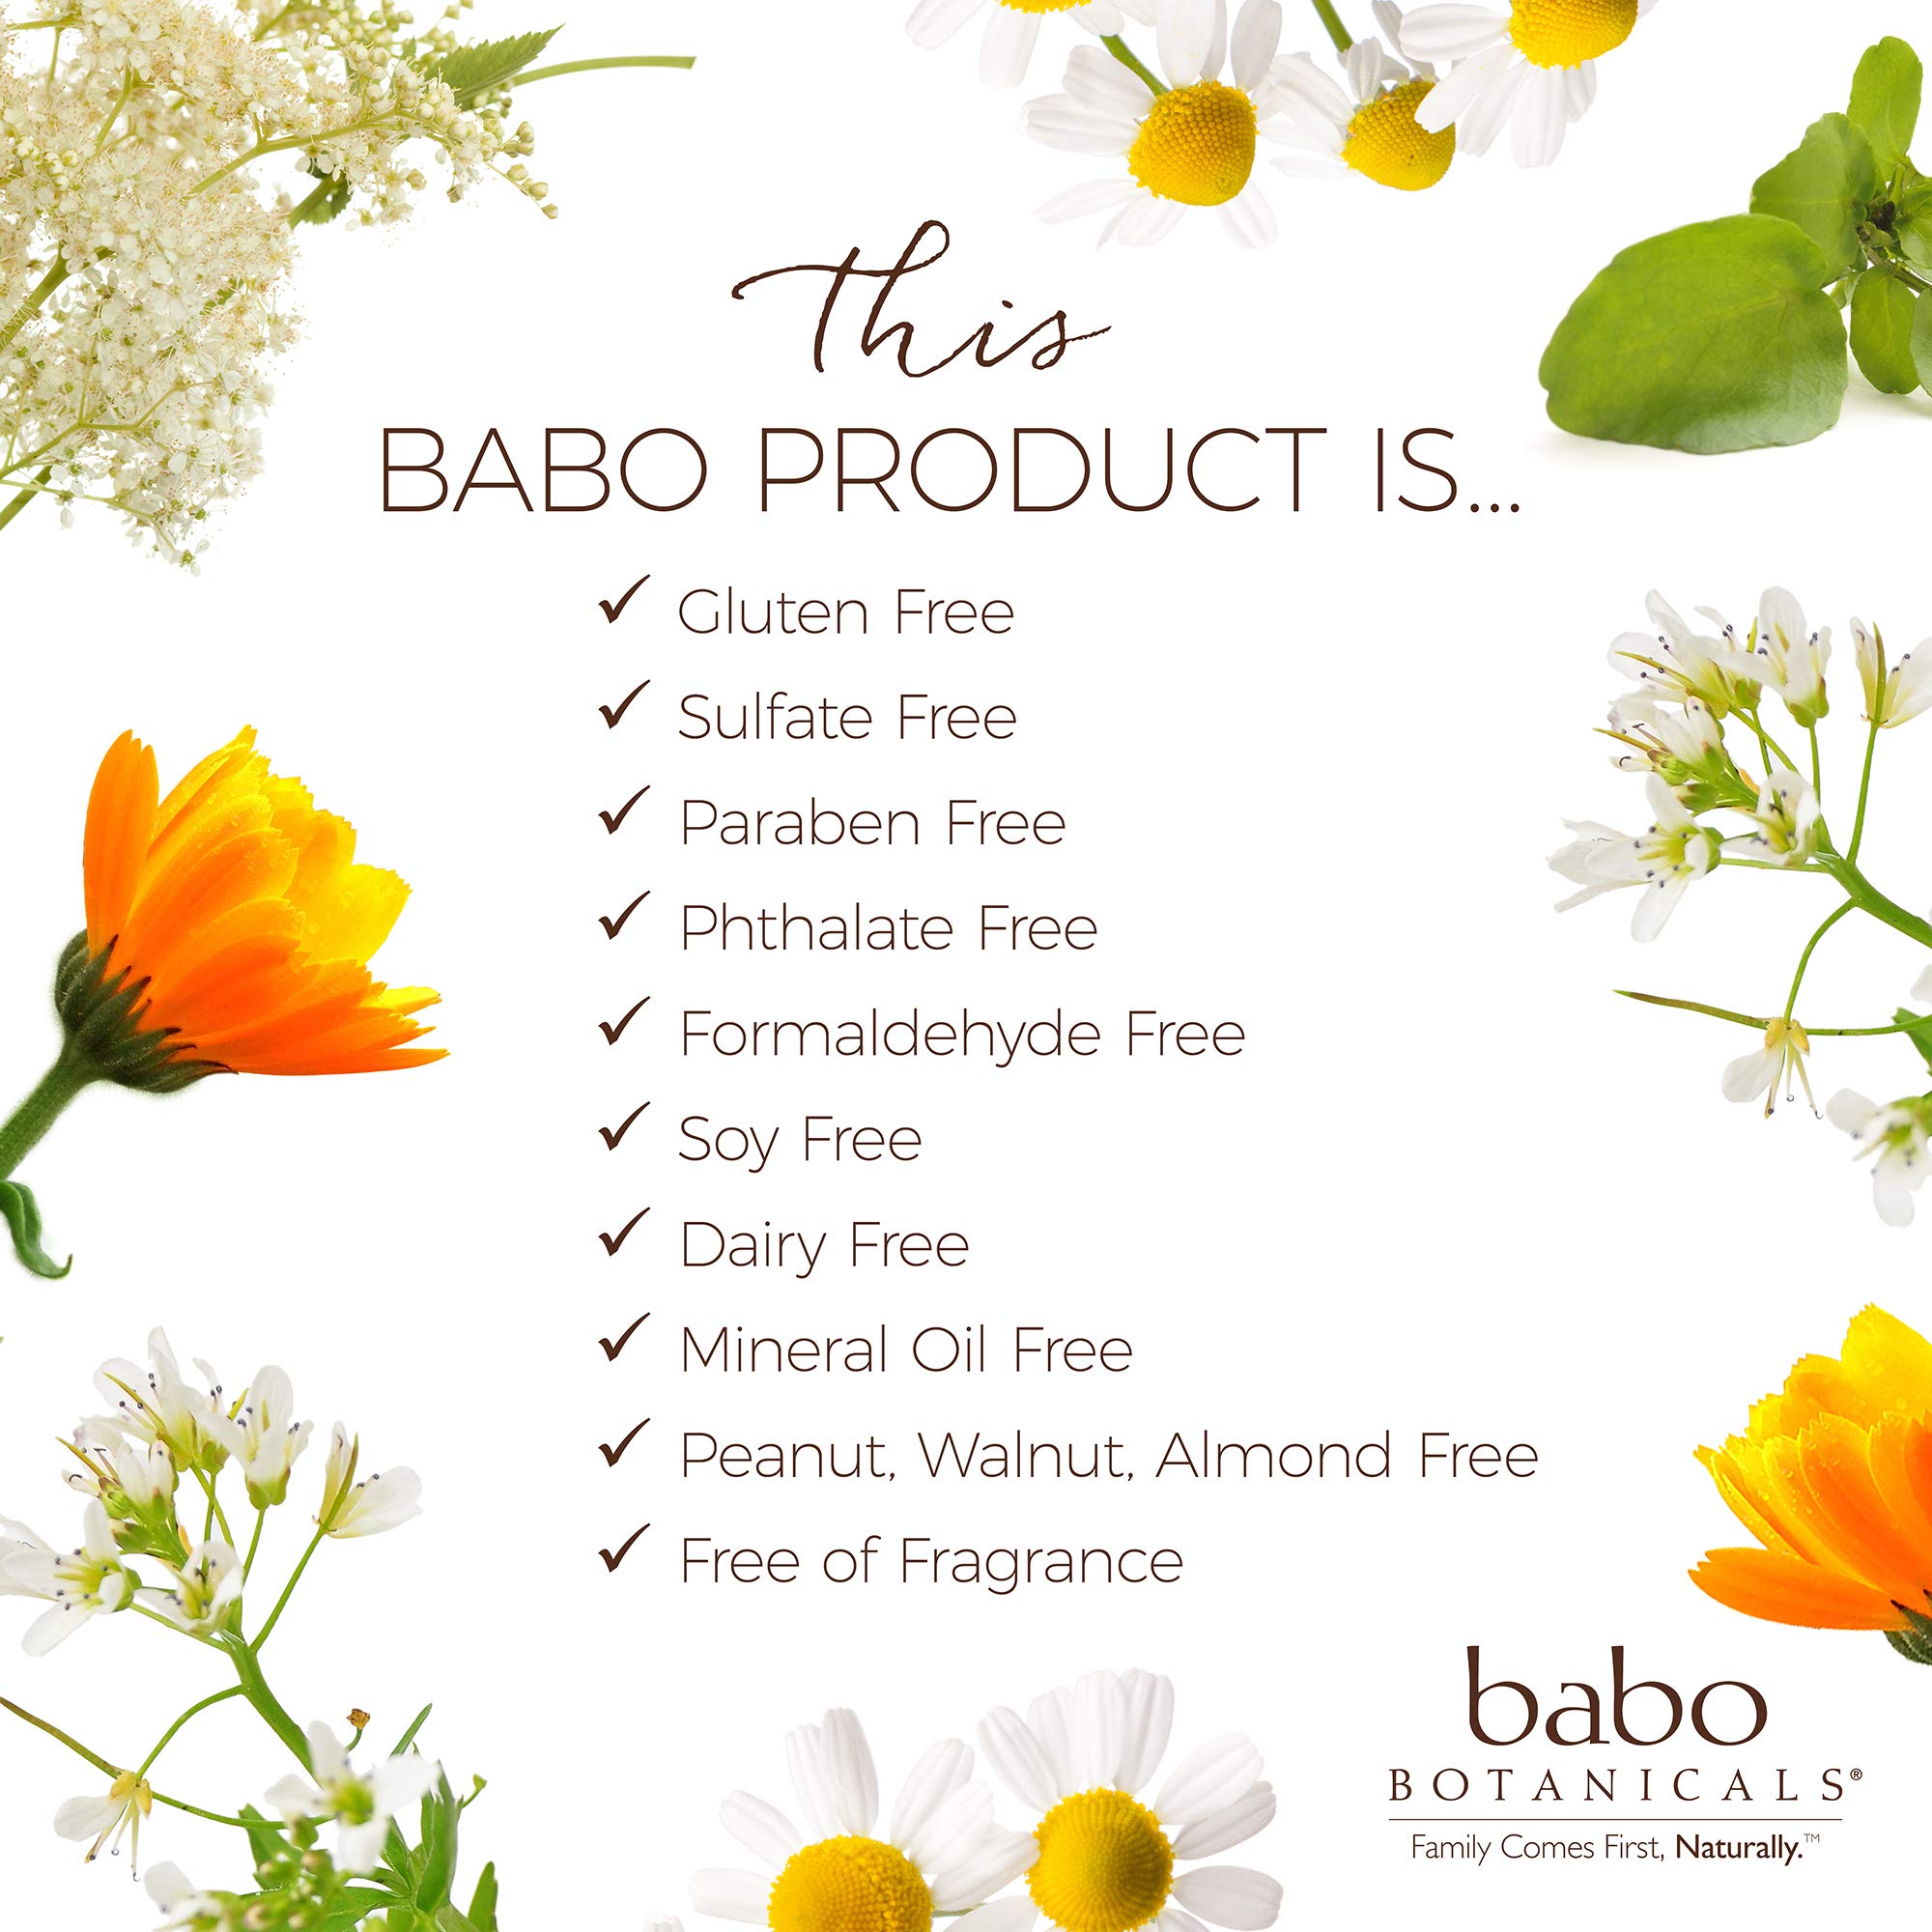 Babo Botanicals Baby Face Mineral Sunscreen Stick SPF 50, Fragrance-Free, Unscented, 2 Count